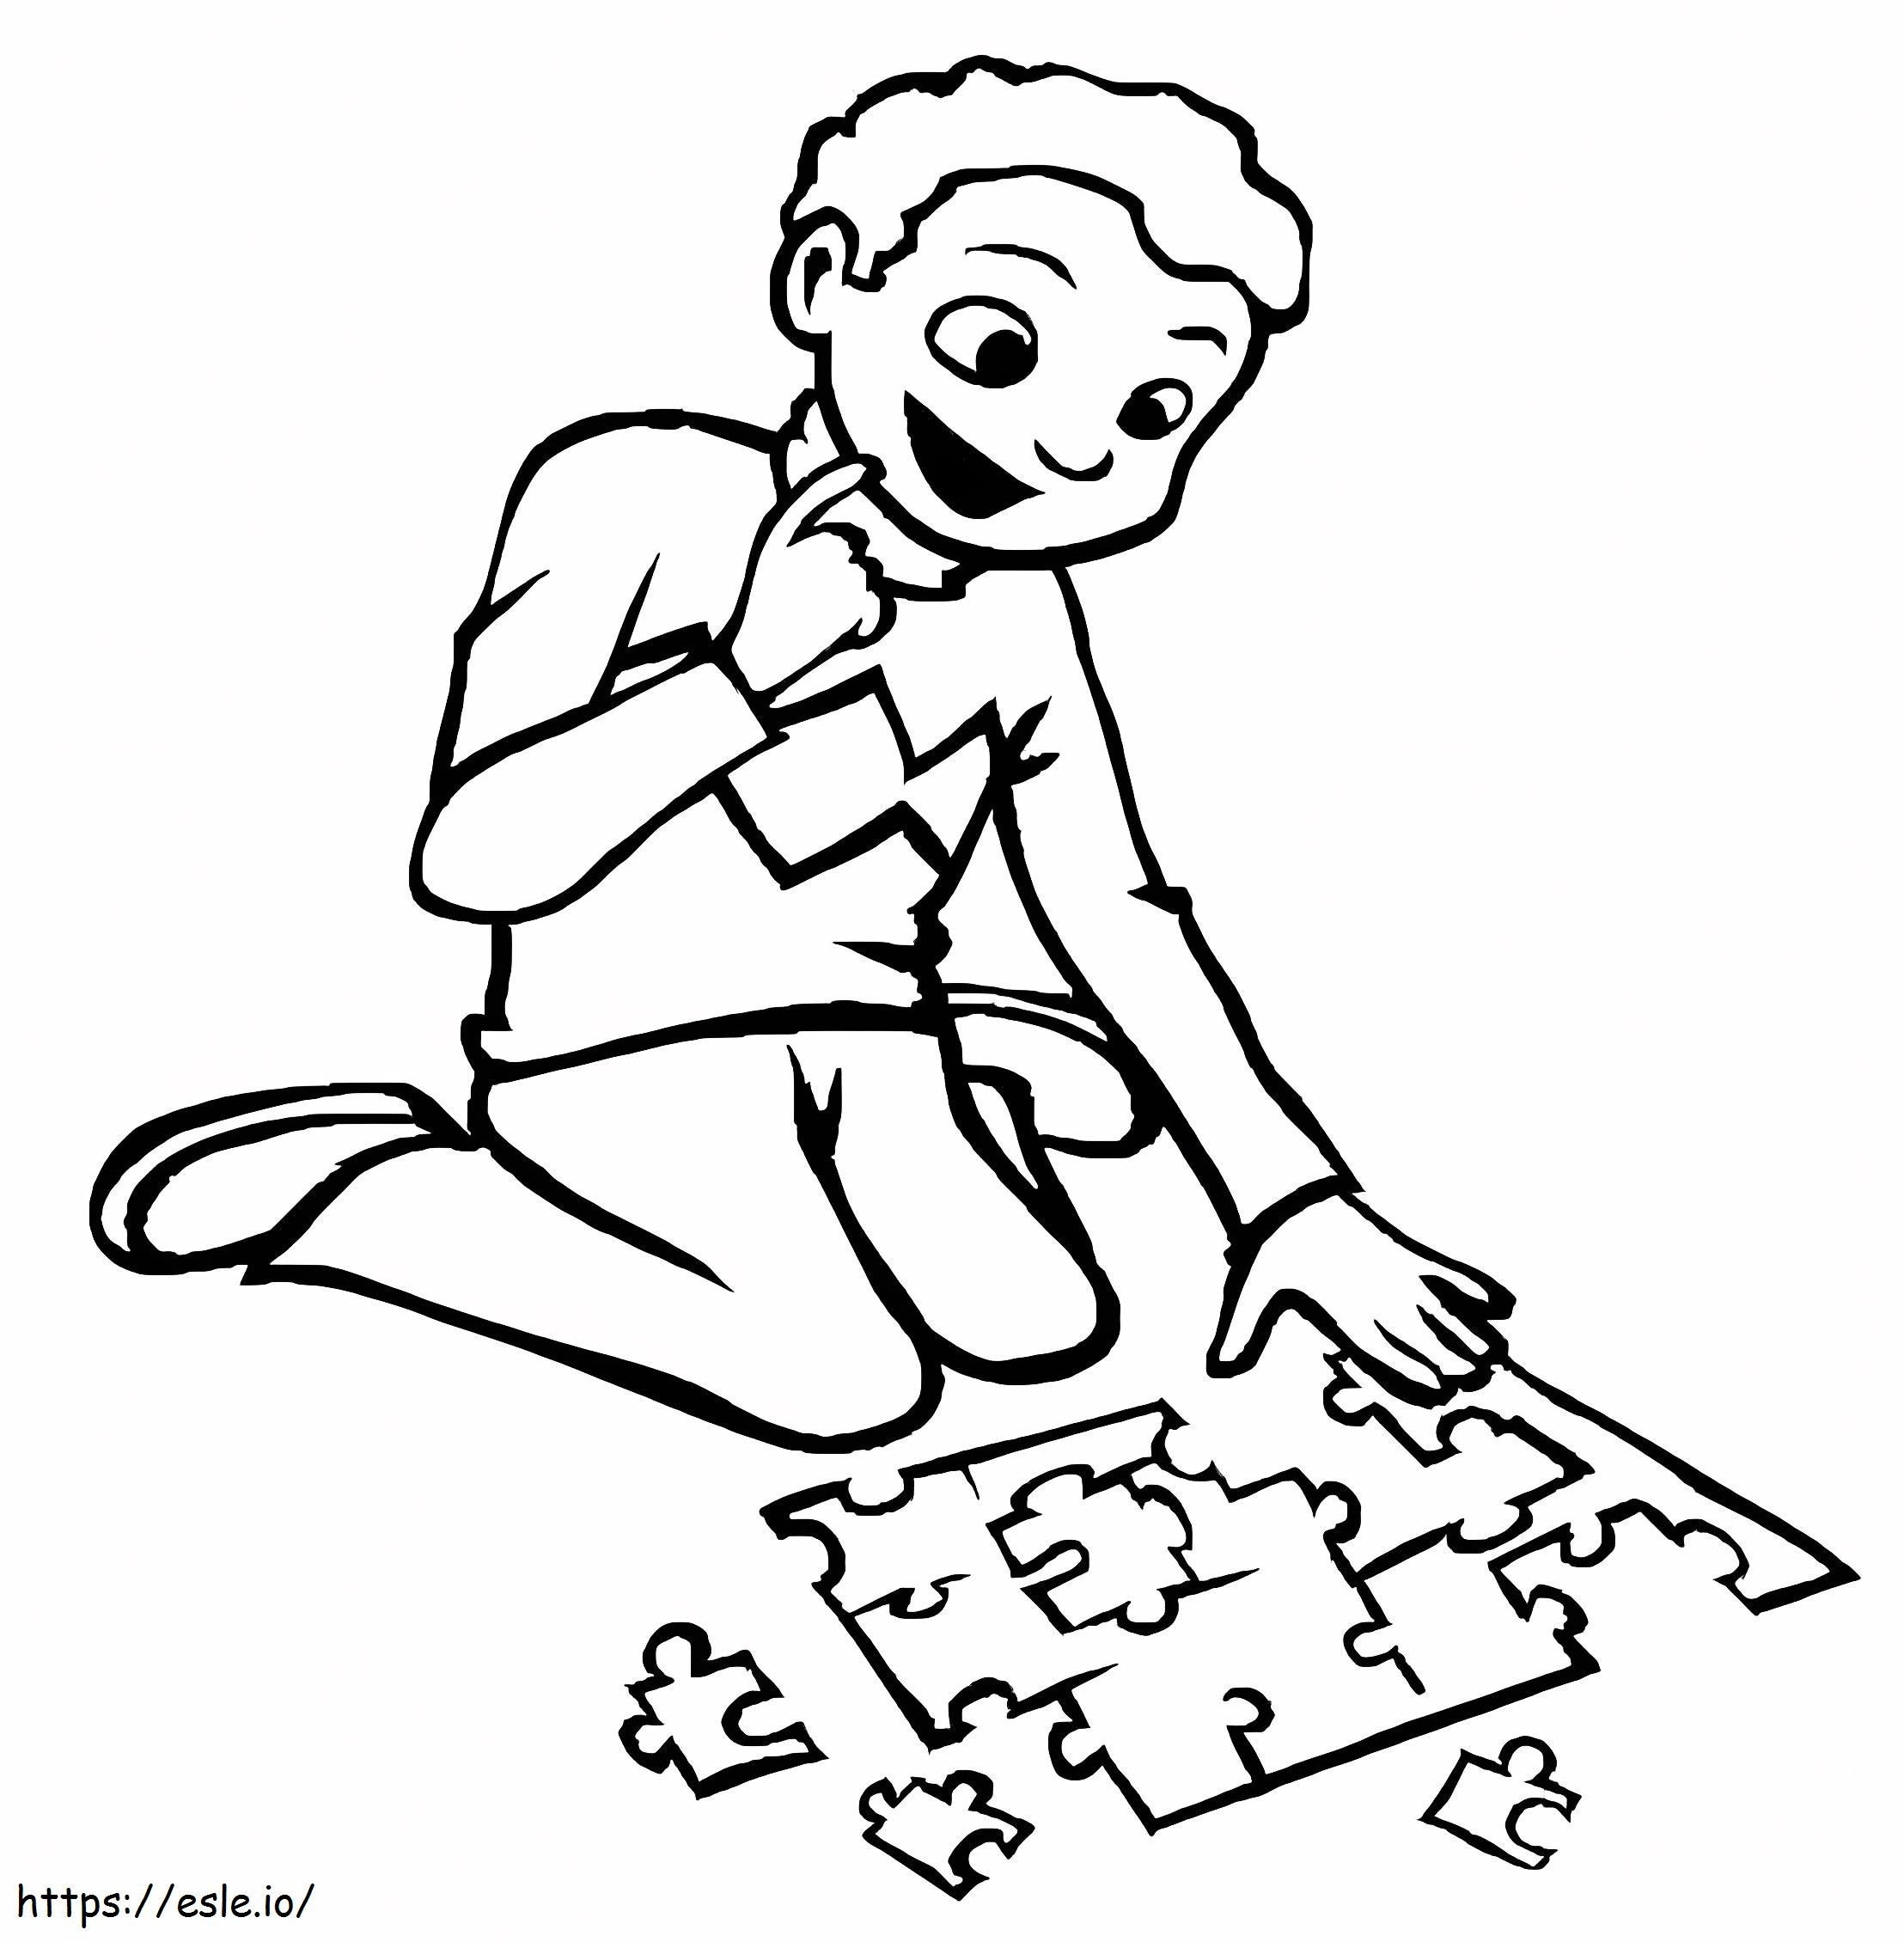 Boy With Jigsaw Puzzles coloring page